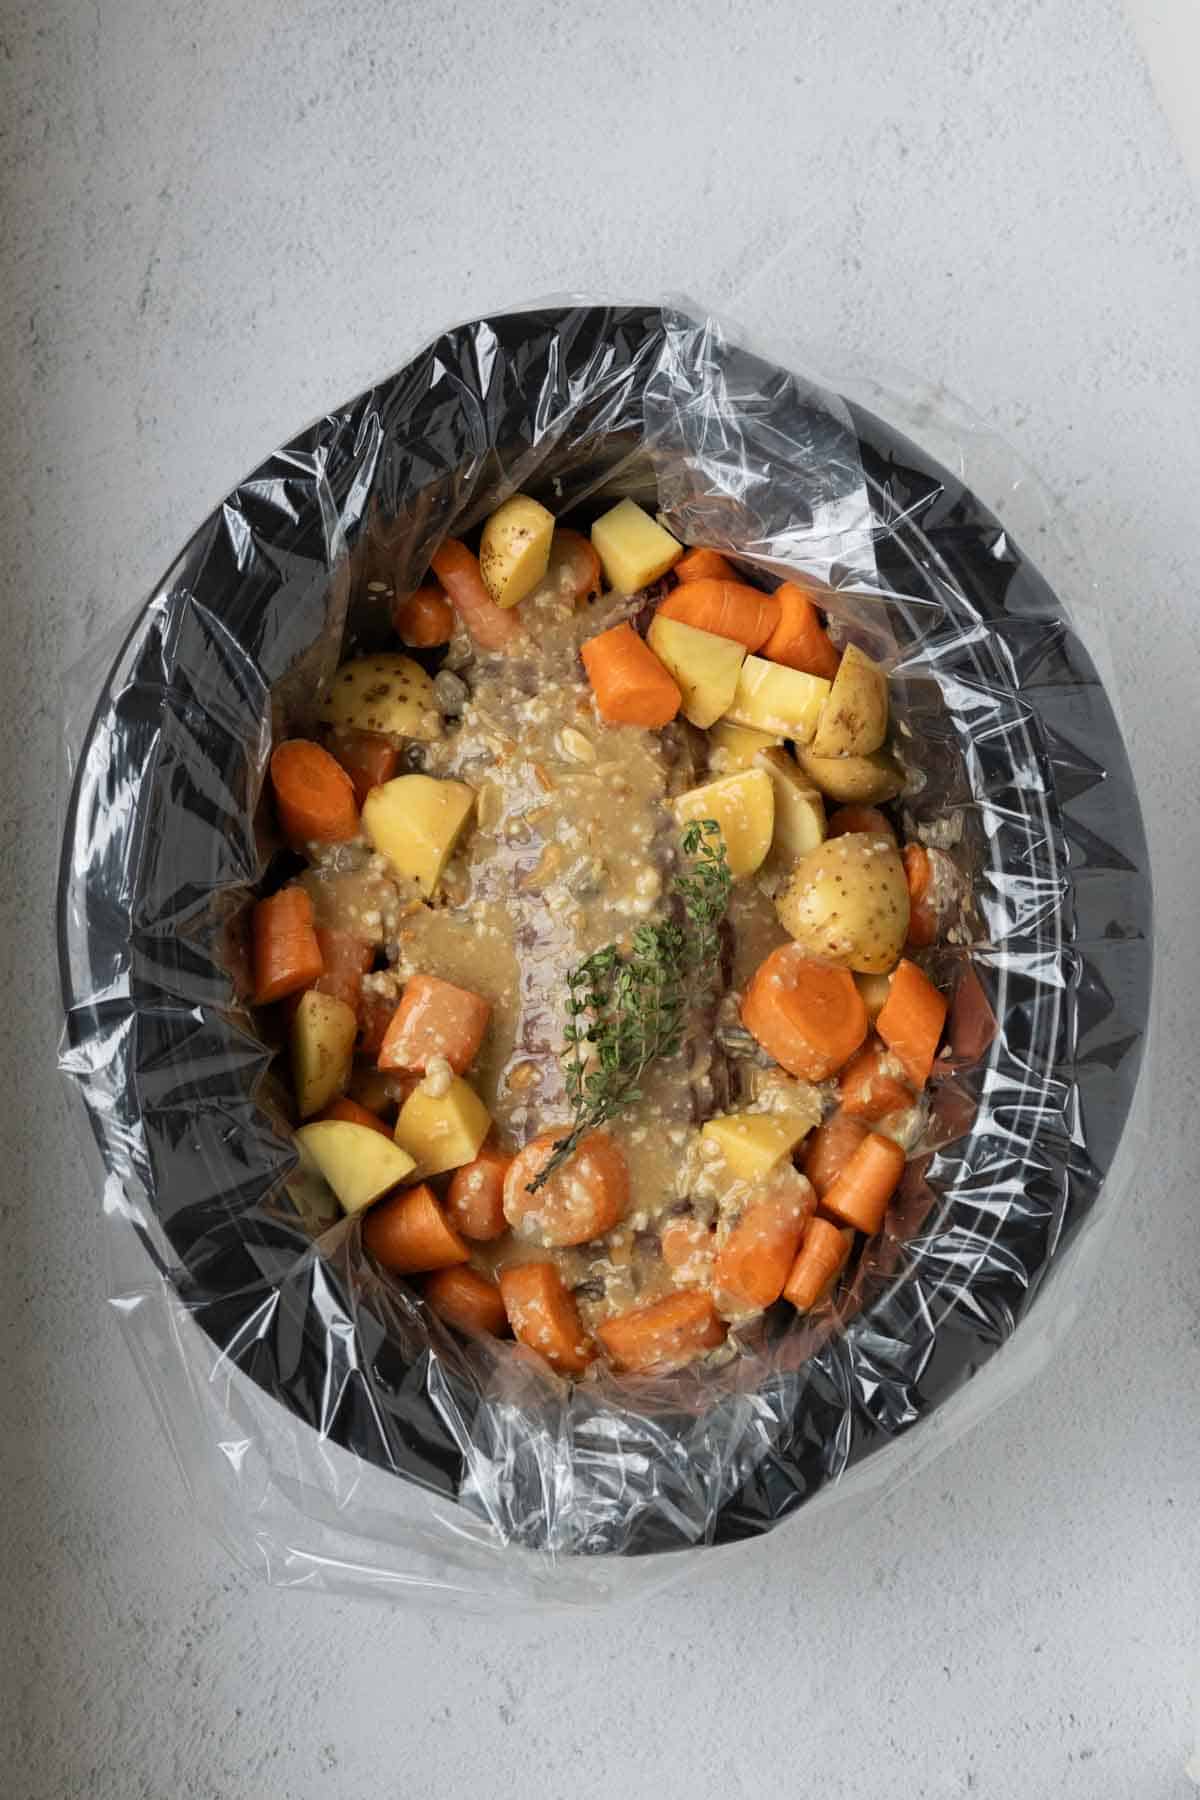 A slow cooker with a roast, diced carrots, potatoes, and mushroom soup gravy.